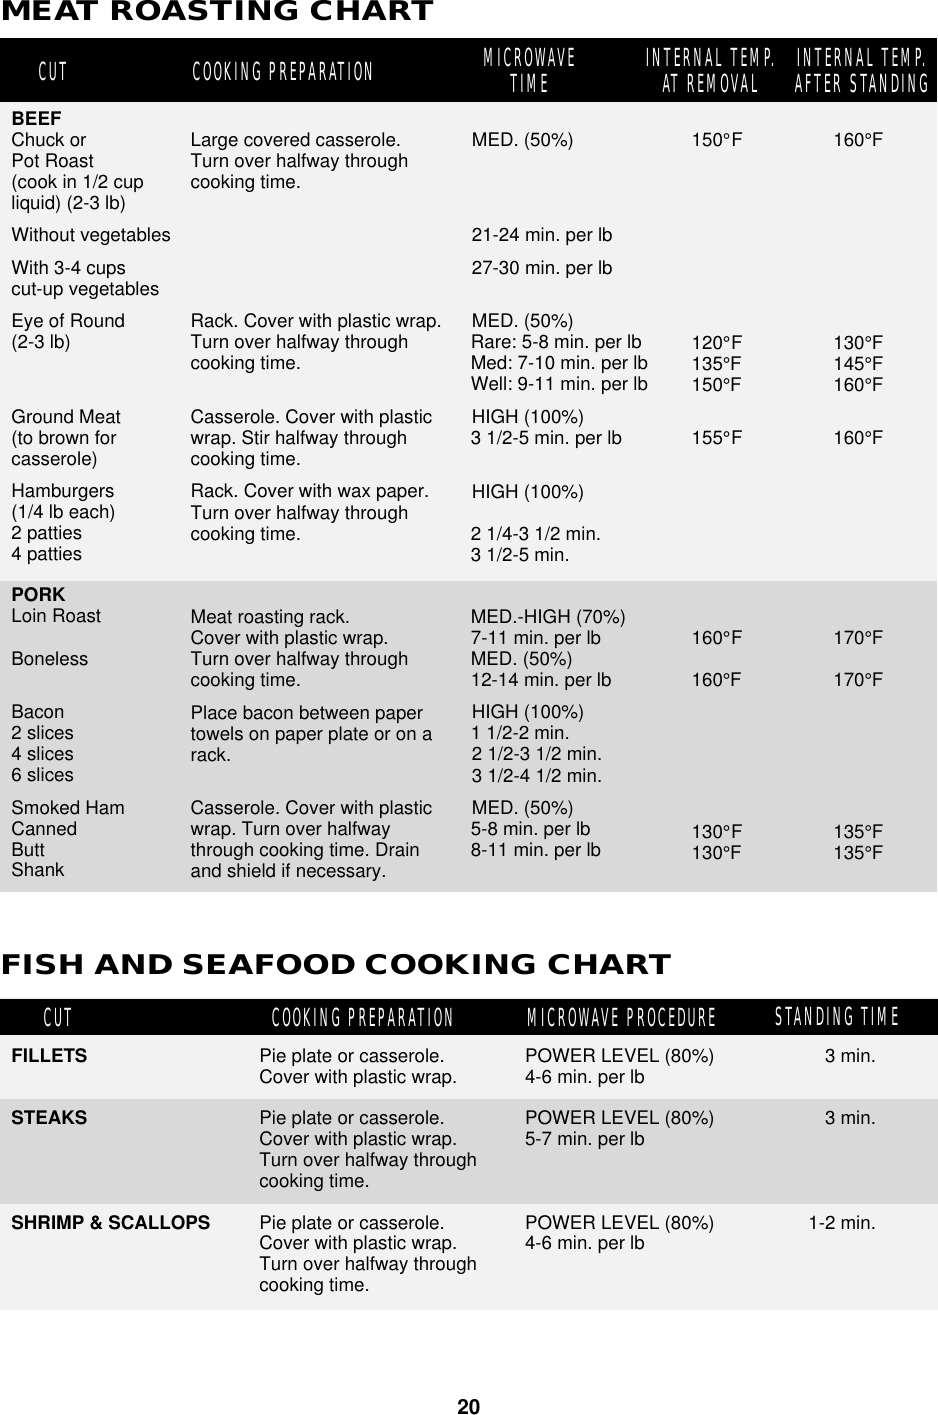 20MEAT ROASTING CHARTFISH AND SEAFOOD COOKING CHARTBEEFChuck orPot Roast(cook in 1/2 cupliquid) (2-3 lb)Without vegetablesWith 3-4 cupscut-up vegetablesEye of Round(2-3 lb)Ground Meat(to brown forcasserole)Hamburgers(1/4 lb each)2 patties4 pattiesPORKLoin RoastBonelessBacon2 slices4 slices6 slicesSmoked HamCannedButtShank150°FMED. (50%)21-24 min. per lb27-30 min. per lbMED. (50%)Rare: 5-8 min. per lbMed: 7-10 min. per lbWell: 9-11 min. per lbHIGH (100%)3 1/2-5 min. per lbHIGH (100%)2 1/4-3 1/2 min.3 1/2-5 min.MED.-HIGH (70%)7-11 min. per lbMED. (50%)12-14 min. per lbHIGH (100%)1 1/2-2 min.2 1/2-3 1/2 min.3 1/2-4 1/2 min.MED. (50%)5-8 min. per lb8-11 min. per lbLarge covered casserole.Turn over halfway throughcooking time.Rack. Cover with plastic wrap.Turn over halfway throughcooking time.Casserole. Cover with plasticwrap. Stir halfway throughcooking time.Rack. Cover with wax paper.Turn over halfway throughcooking time.Meat roasting rack.Cover with plastic wrap.Turn over halfway throughcooking time.Place bacon between papertowels on paper plate or on arack.Casserole. Cover with plasticwrap. Turn over halfwaythrough cooking time. Drainand shield if necessary.160°FCUT MICROWAVETIME INTERNAL TEMP.AT REMOVAL INTERNAL TEMP.AFTER STANDINGCOOKING PREPARATION3 min.3 min.1-2 min.FILLETSSTEAKSSHRIMP &amp; SCALLOPS  CUT STANDING TIMEMICROWAVE PROCEDUREPOWER LEVEL (80%)4-6 min. per lbPOWER LEVEL (80%)5-7 min. per lbPOWER LEVEL (80%)4-6 min. per lbPie plate or casserole.Cover with plastic wrap.Pie plate or casserole.Cover with plastic wrap.Turn over halfway throughcooking time.Pie plate or casserole.Cover with plastic wrap.Turn over halfway throughcooking time.COOKING PREPARATION120°F135°F150°F155°F160°F160°F130°F130°F130°F145°F160°F160°F170°F170°F135°F135°F